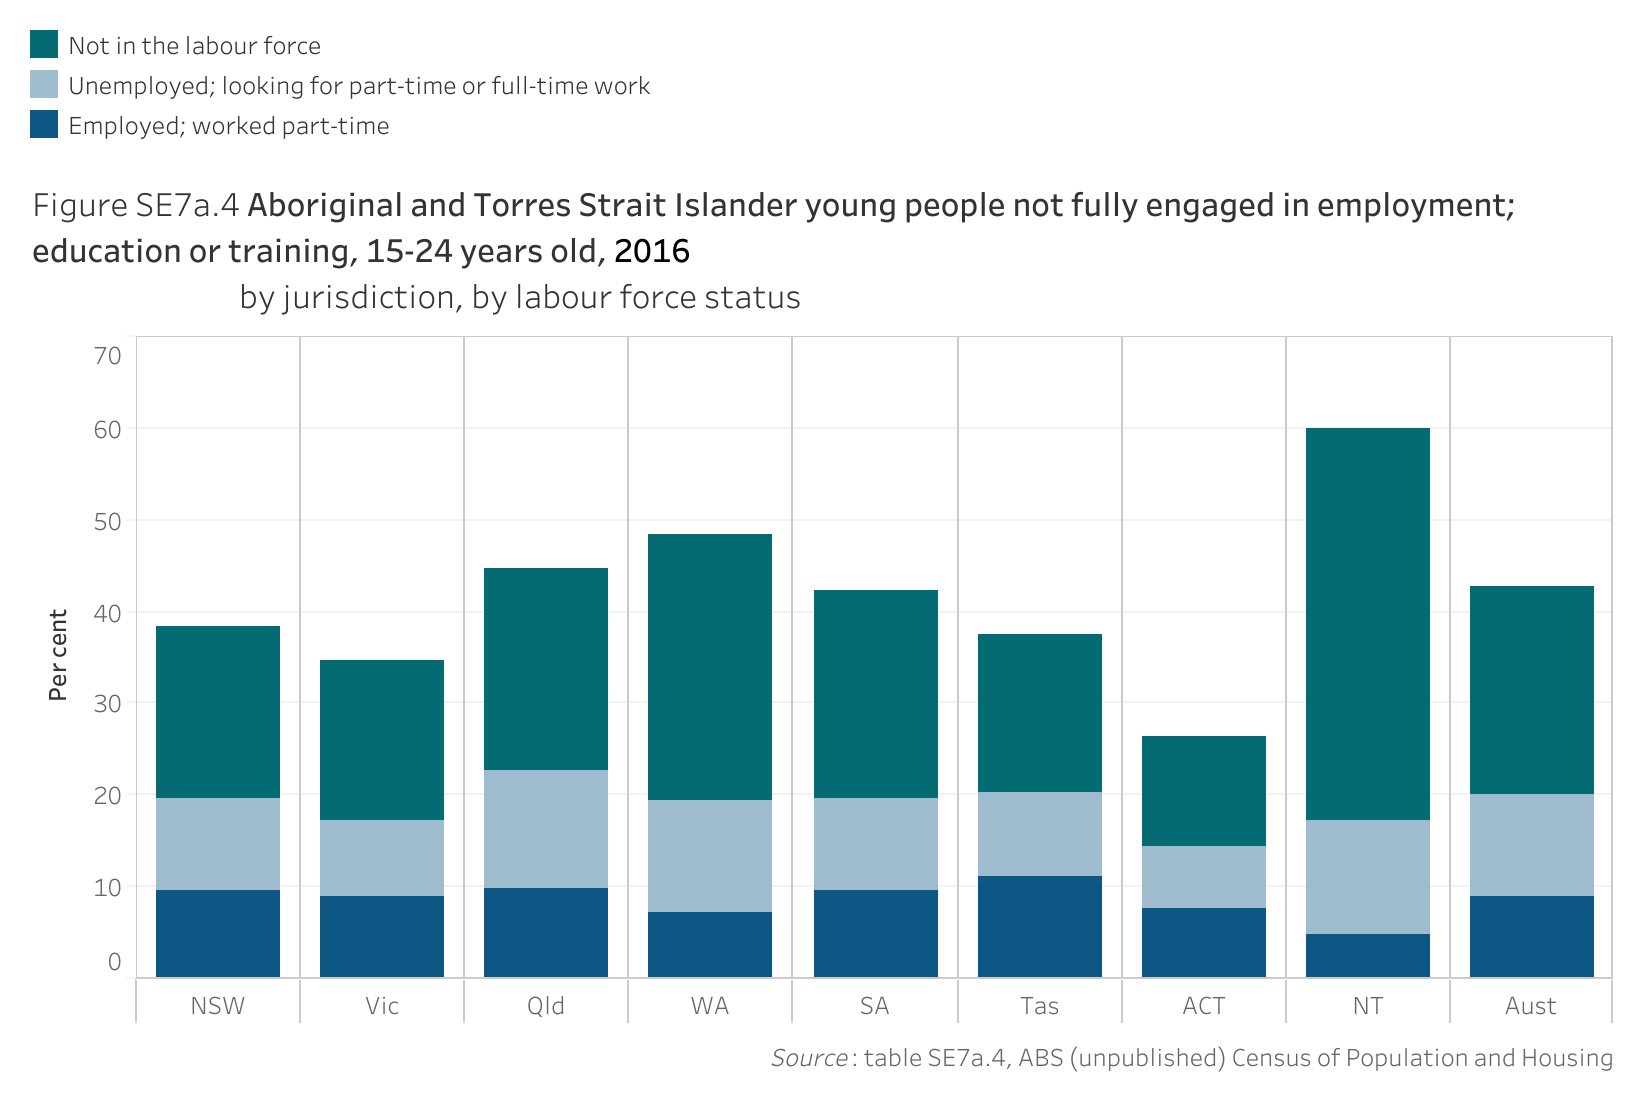 Figure SE7a.4. Bar chart showing the proportion of Aboriginal and Torres Strait Islander young people aged 15-24 years old not fully engaged in employment; education or training in 2016, by jurisdiction and by labour force status. Data table of figure SE7a.4 is below.